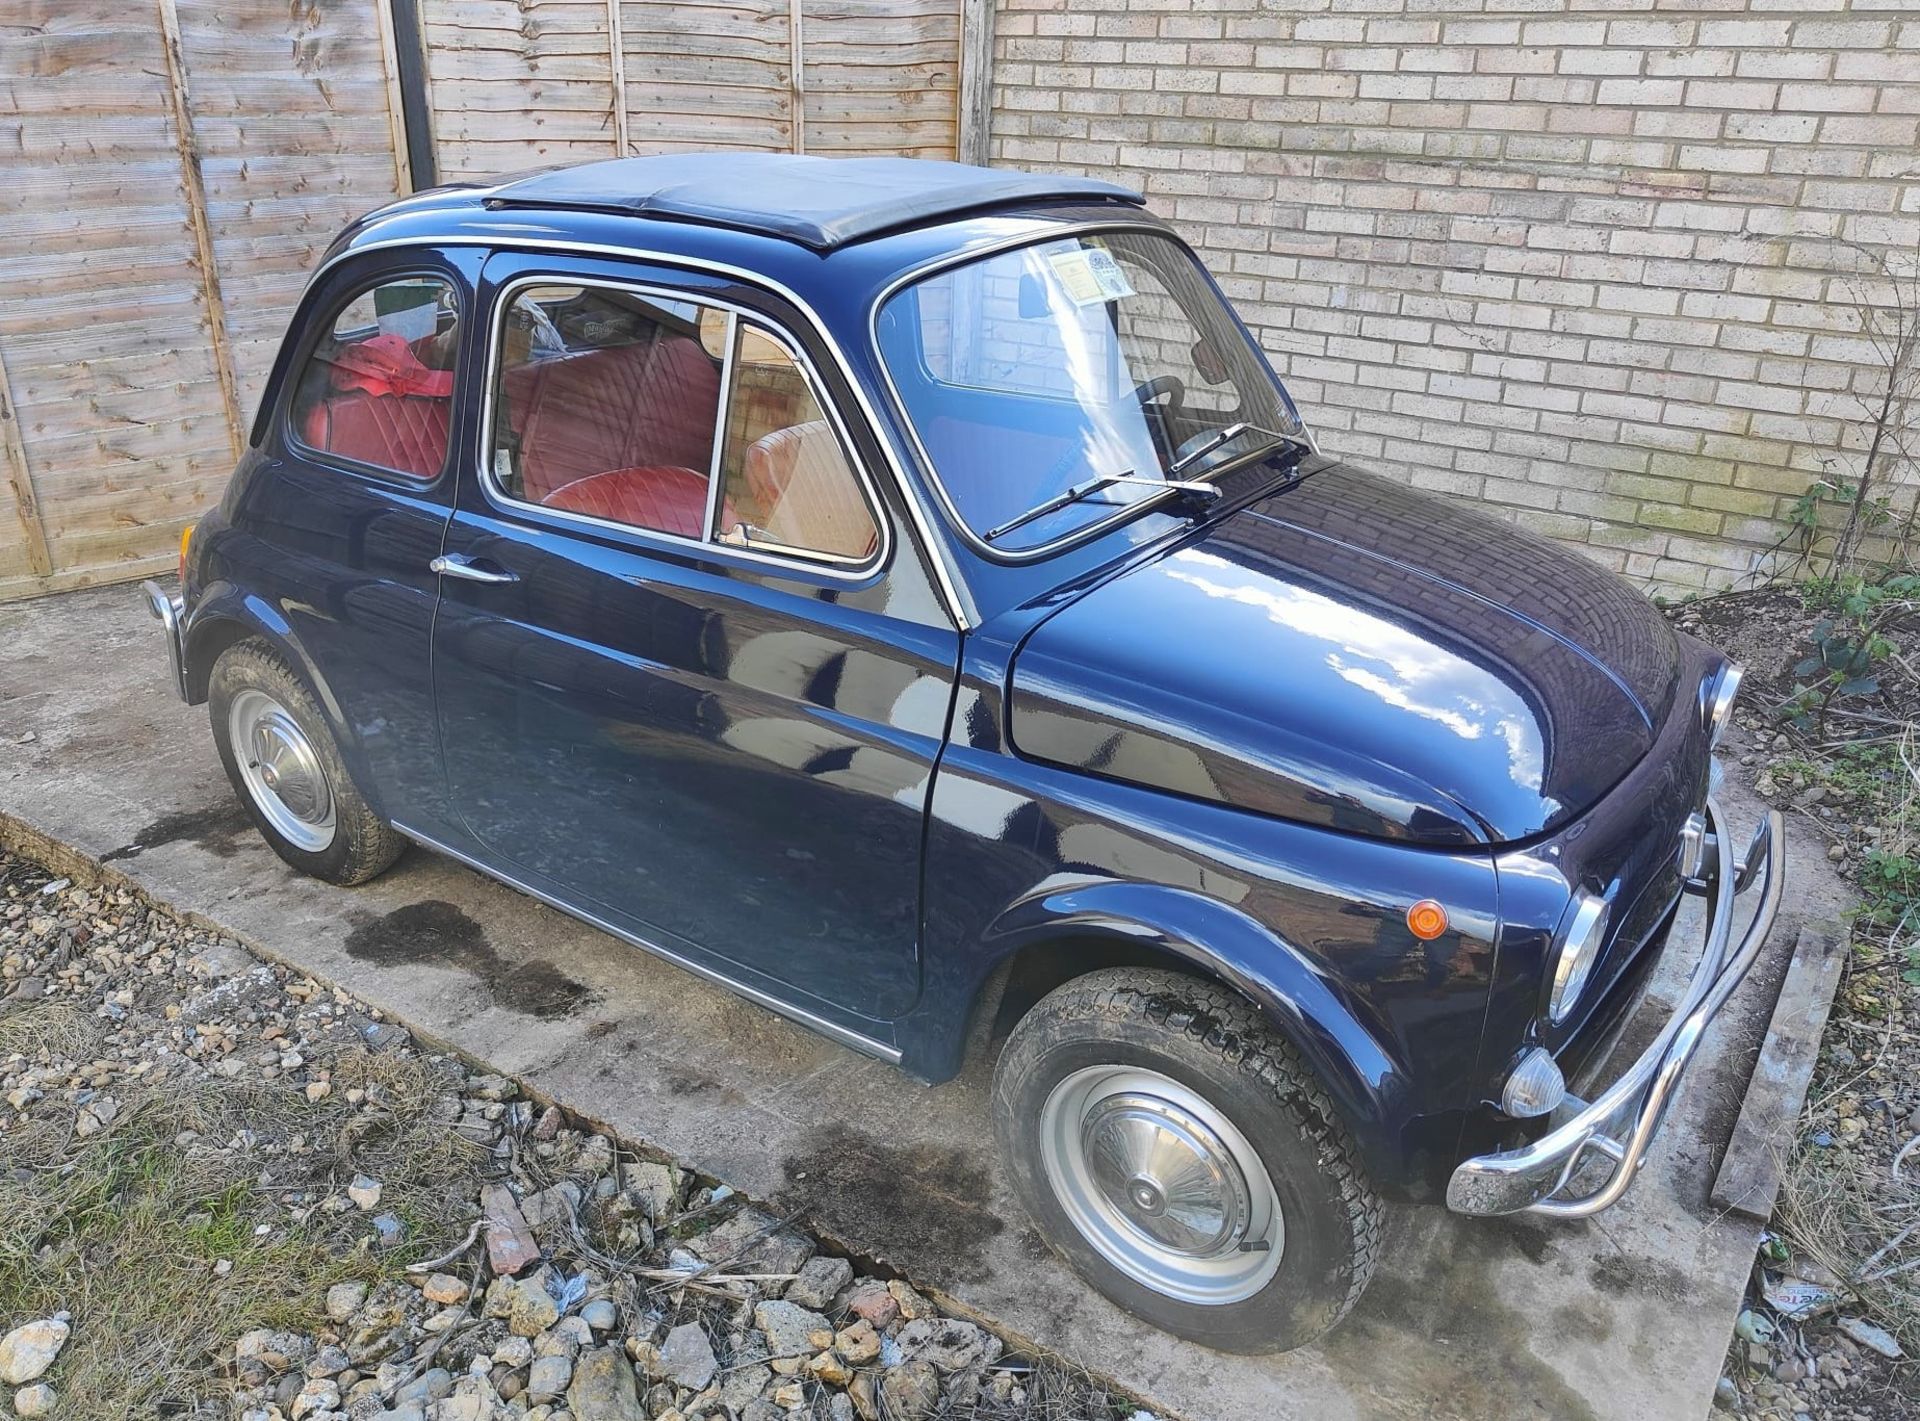 1971 FIAT 500L SALOON Registration Number: JBY 492J Chassis Number: TBA Recorded Mileage: 40,300